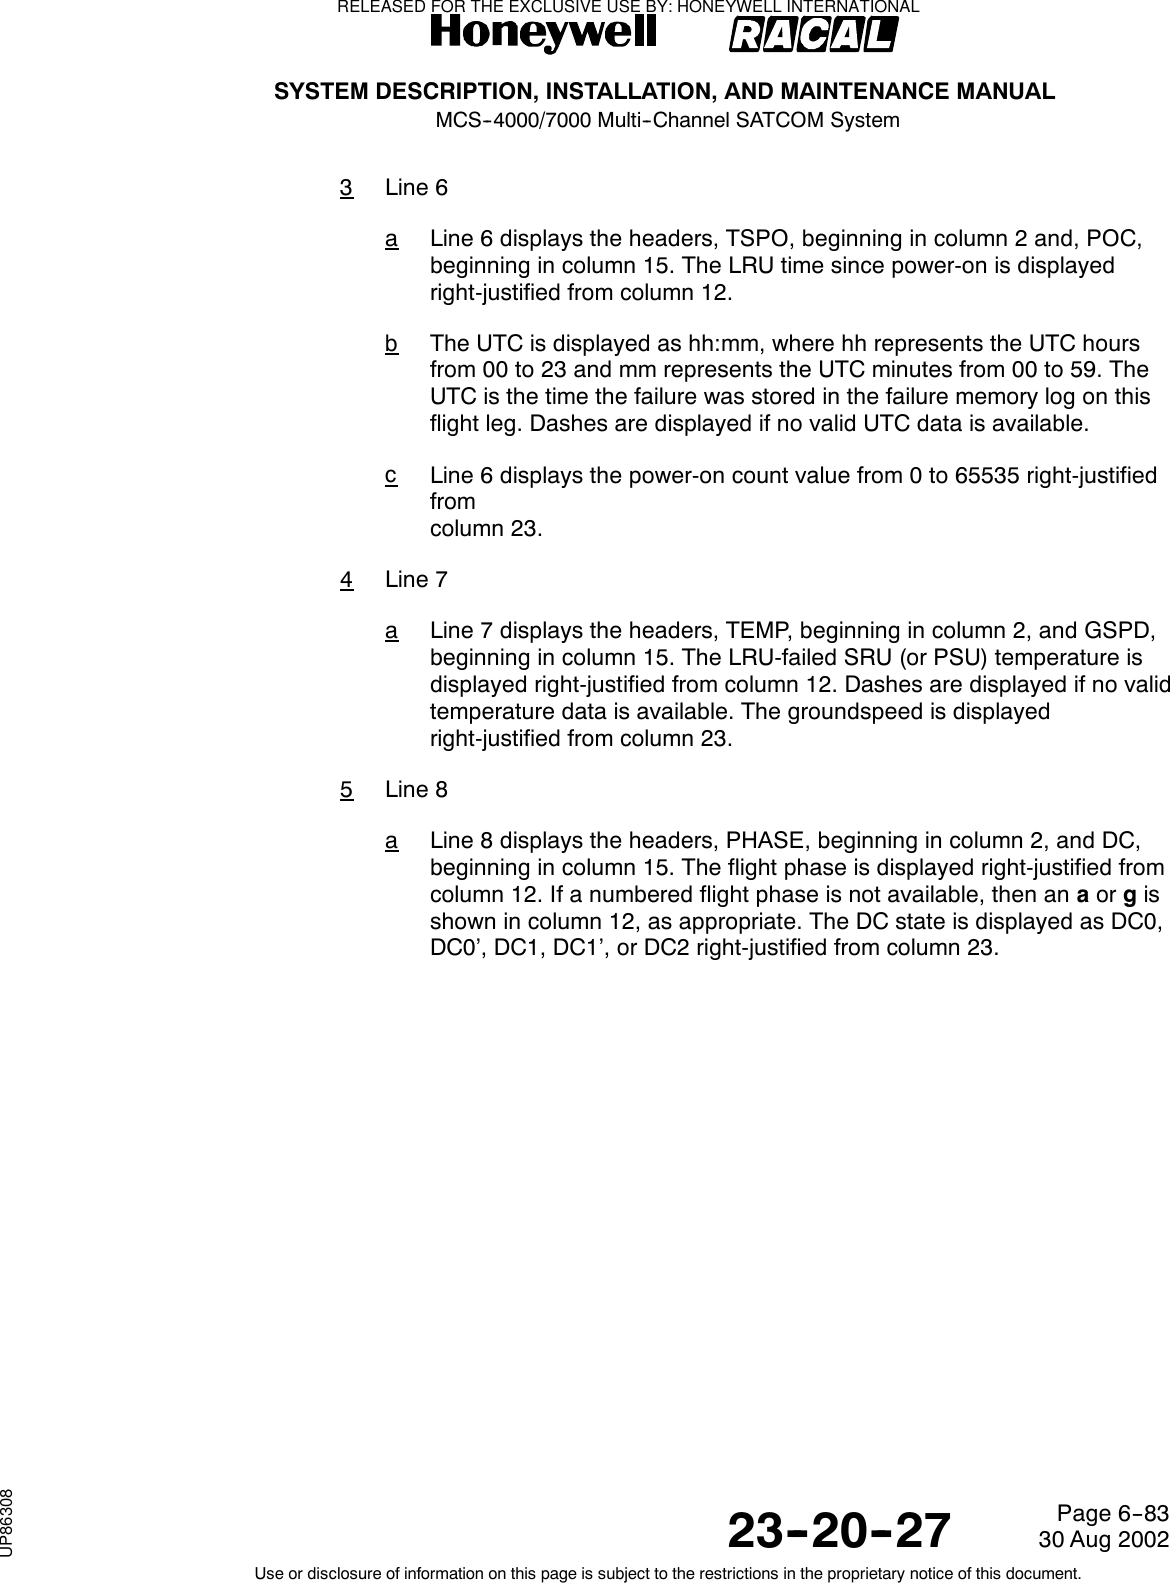 SYSTEM DESCRIPTION, INSTALLATION, AND MAINTENANCE MANUALMCS--4000/7000 Multi--Channel SATCOM System23--20--2730 Aug 2002Use or disclosure of information on this page is subject to the restrictions in the proprietary notice of this document.Page 6--833Line 6aLine 6 displays the headers, TSPO, beginning in column 2 and, POC,beginning in column 15. The LRU time since power-on is displayedright-justified from column 12.bThe UTC is displayed as hh:mm, where hh represents the UTC hoursfrom 00 to 23 and mm represents the UTC minutes from 00 to 59. TheUTCisthetimethefailurewasstoredinthefailurememorylogonthisflight leg. Dashes are displayed if no valid UTC data is available.cLine 6 displays the power-on count value from 0 to 65535 right-justifiedfromcolumn 23.4Line 7aLine 7 displays the headers, TEMP, beginning in column 2, and GSPD,beginning in column 15. The LRU-failed SRU (or PSU) temperature isdisplayed right-justified from column 12. Dashes are displayed if no validtemperature data is available. The groundspeed is displayedright-justified from column 23.5Line 8aLine 8 displays the headers, PHASE, beginning in column 2, and DC,beginning in column 15. The flight phase is displayed right-justified fromcolumn 12. If a numbered flight phase is not available, then an aor gisshown in column 12, as appropriate. The DC state is displayed as DC0,DC0’, DC1, DC1’, or DC2 right-justified from column 23.RELEASED FOR THE EXCLUSIVE USE BY: HONEYWELL INTERNATIONALUP86308